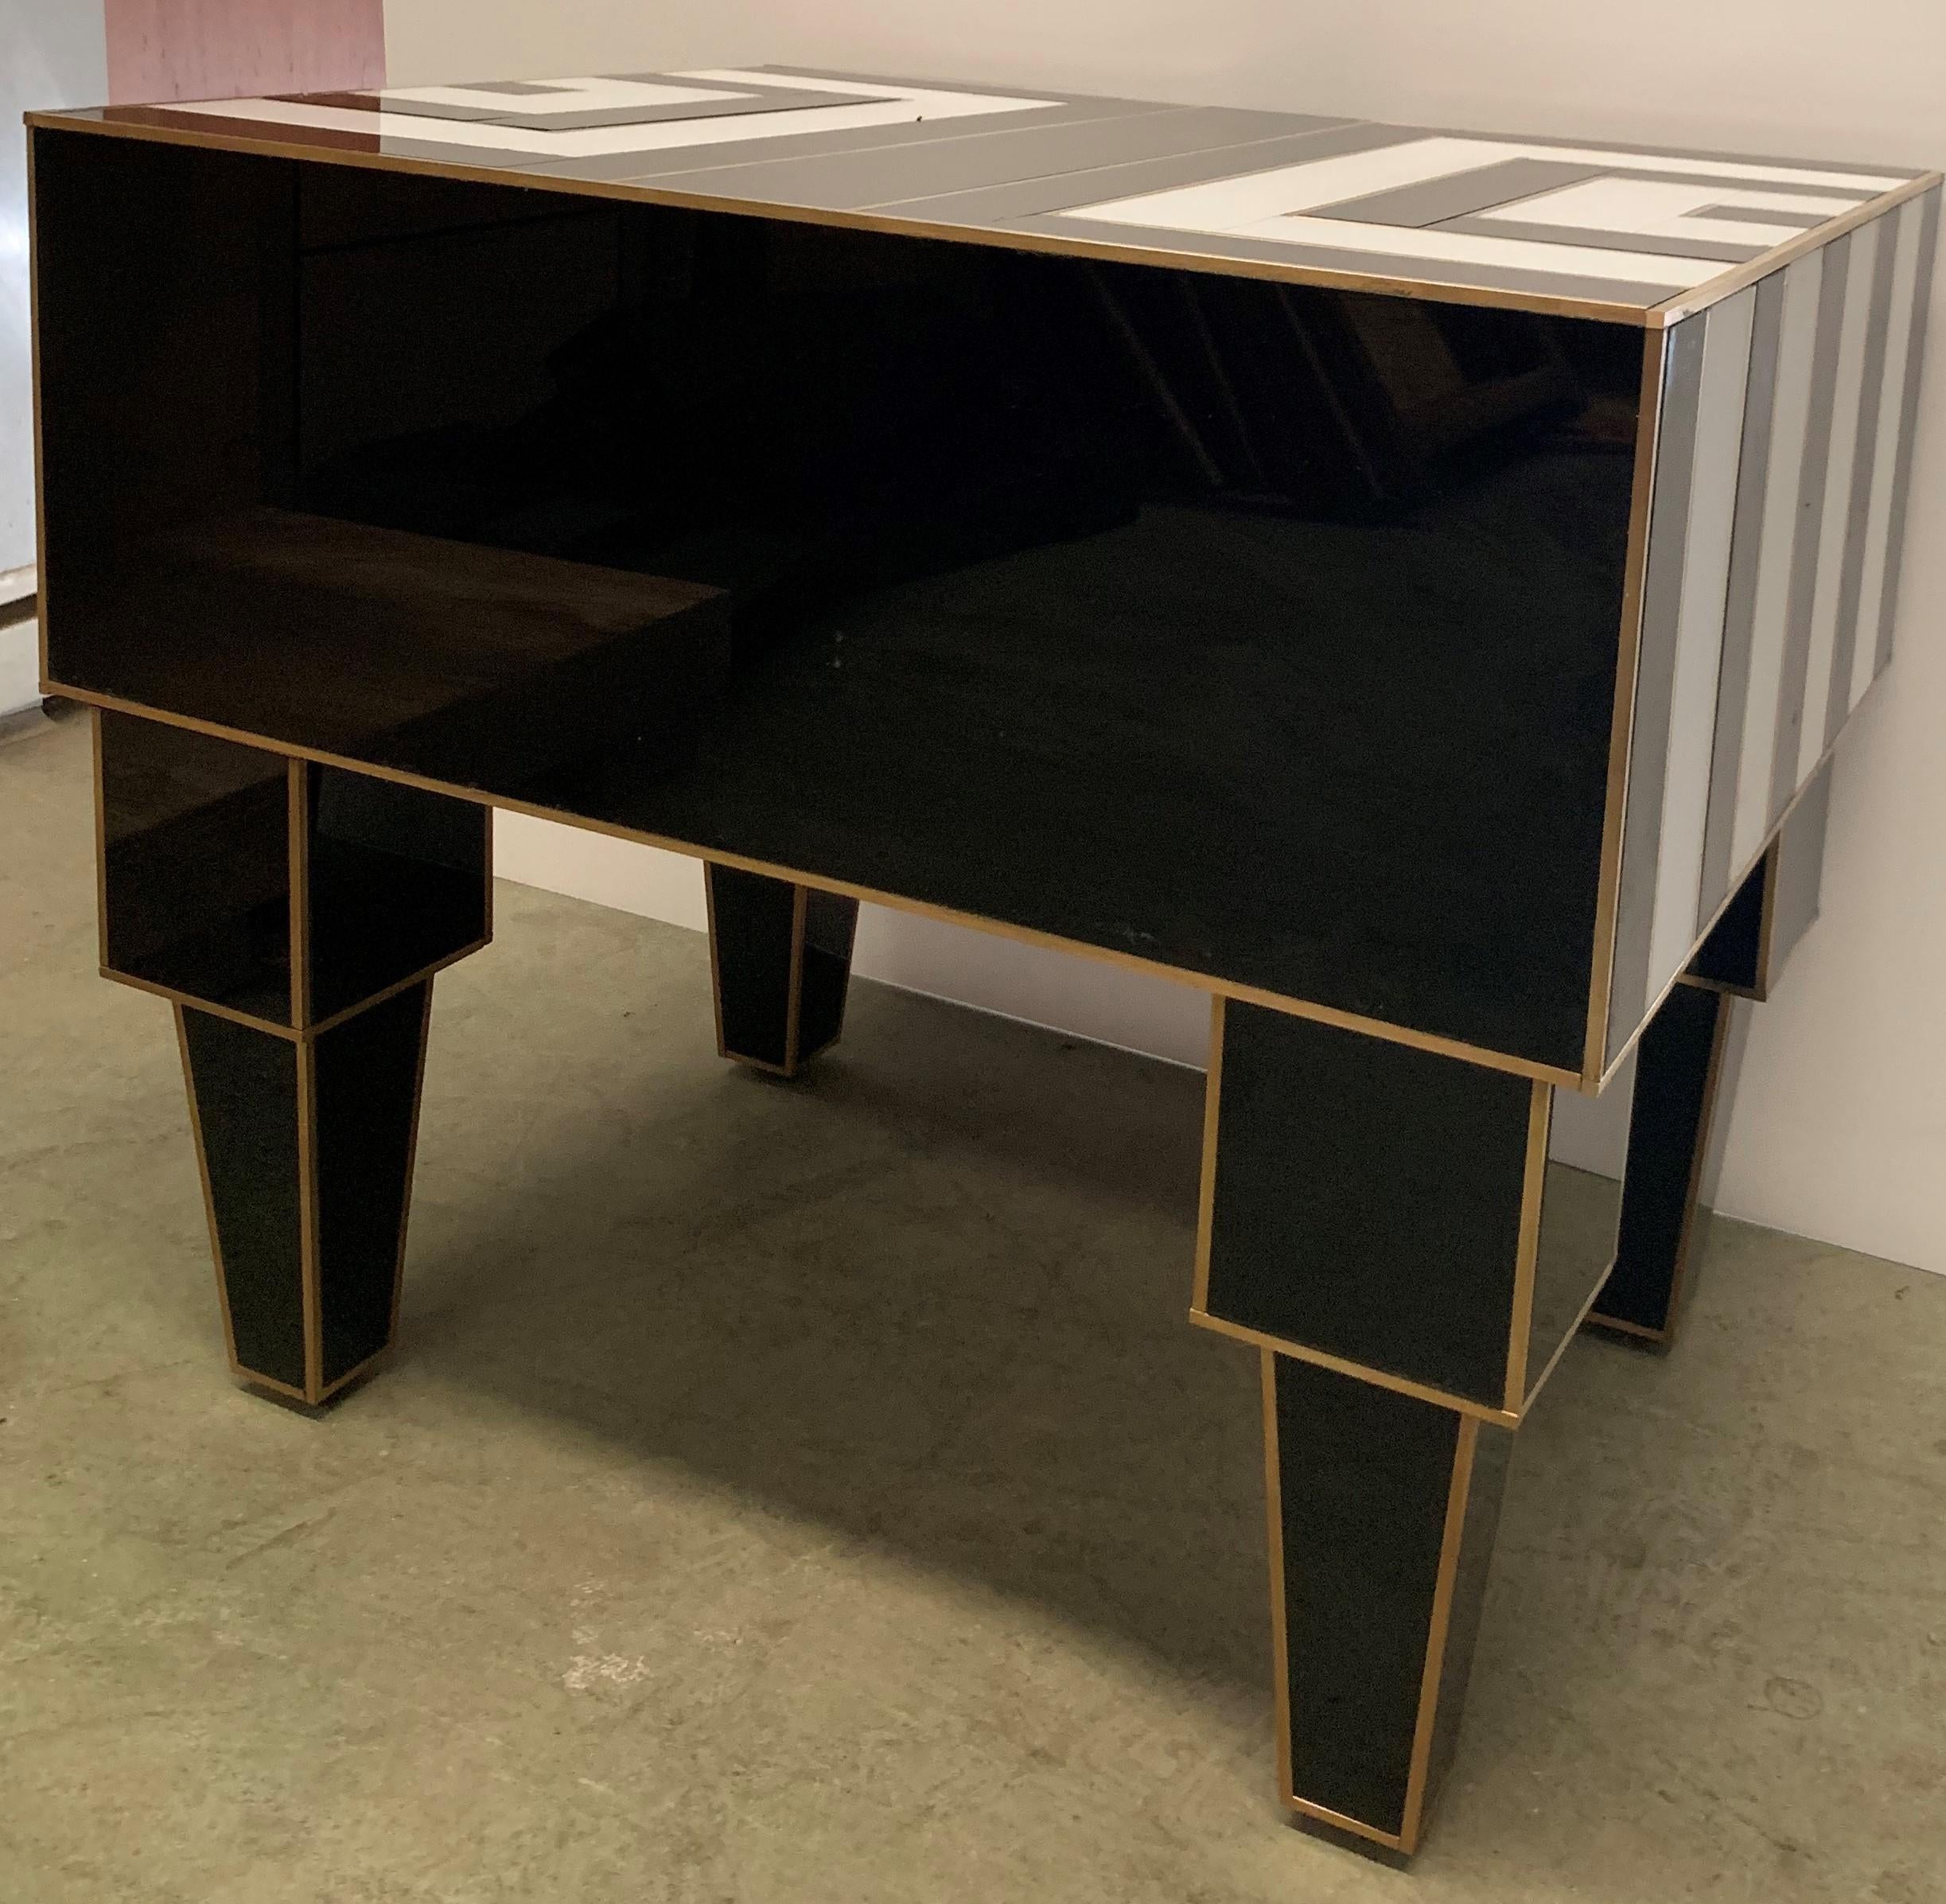 Pair of Mirrored and Brass Nightstands with One-Drawer in Black and White 9